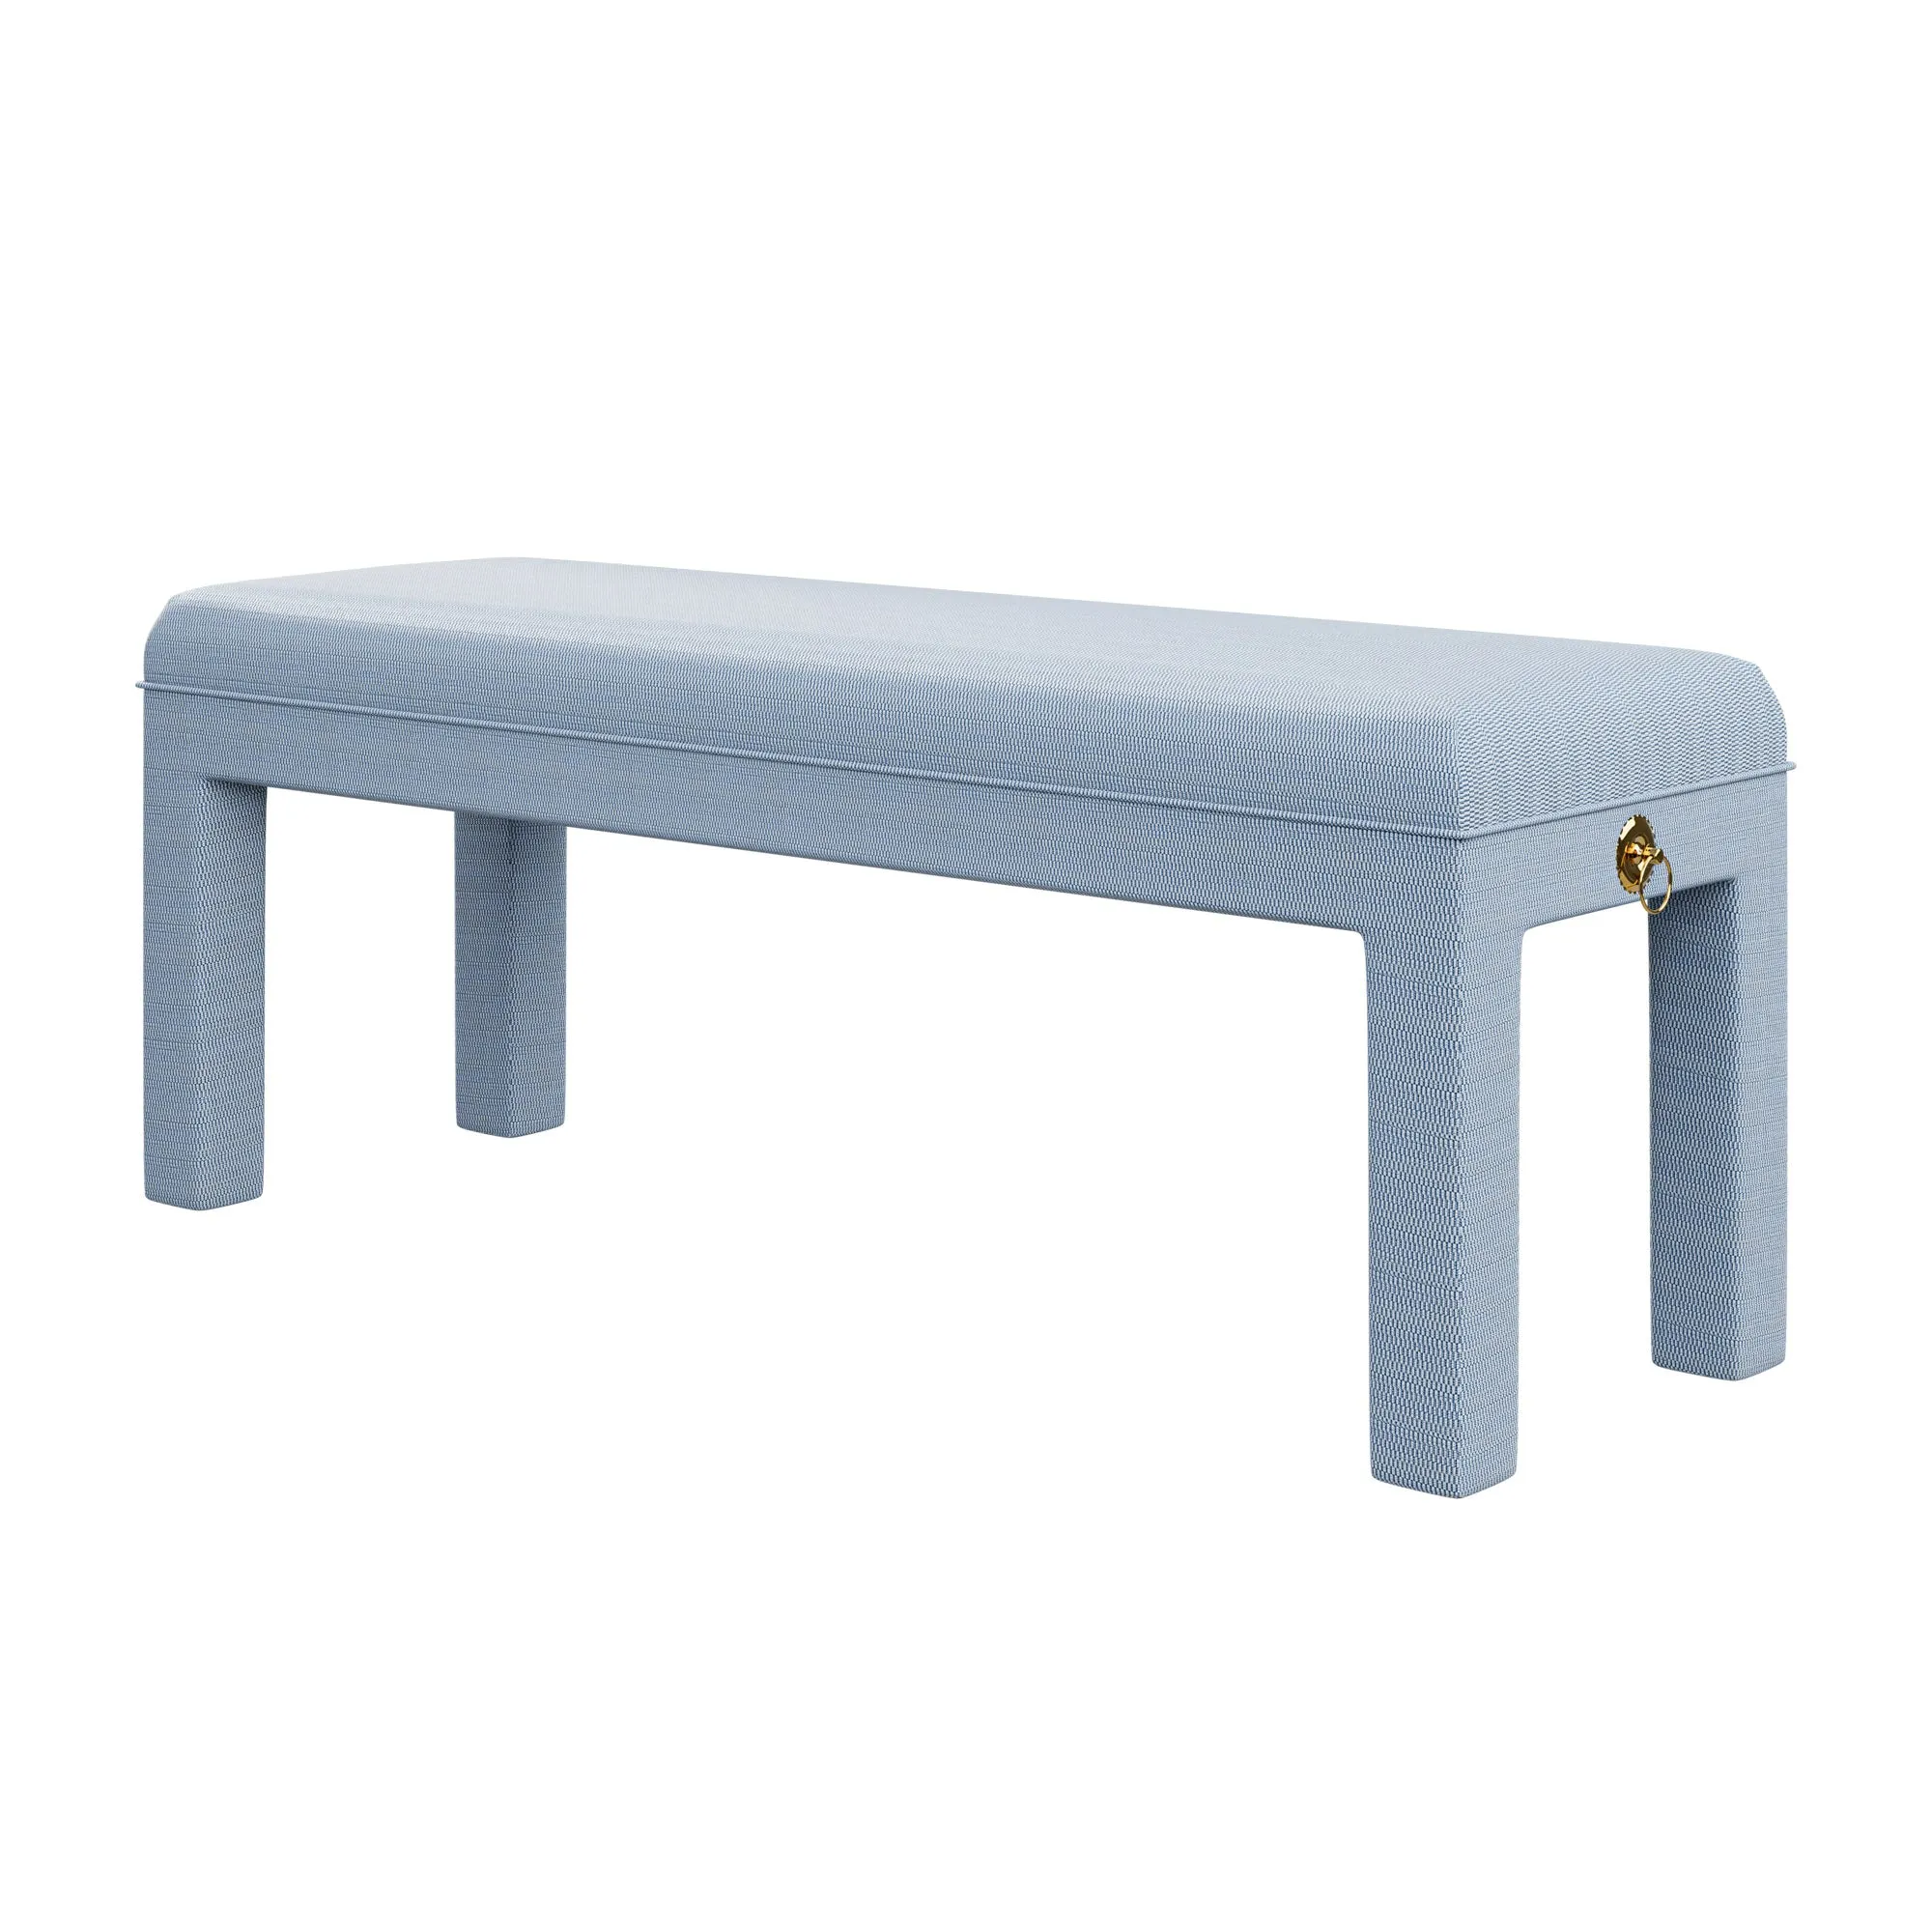 In Stock Arden Bench in Tory Blue Fabric